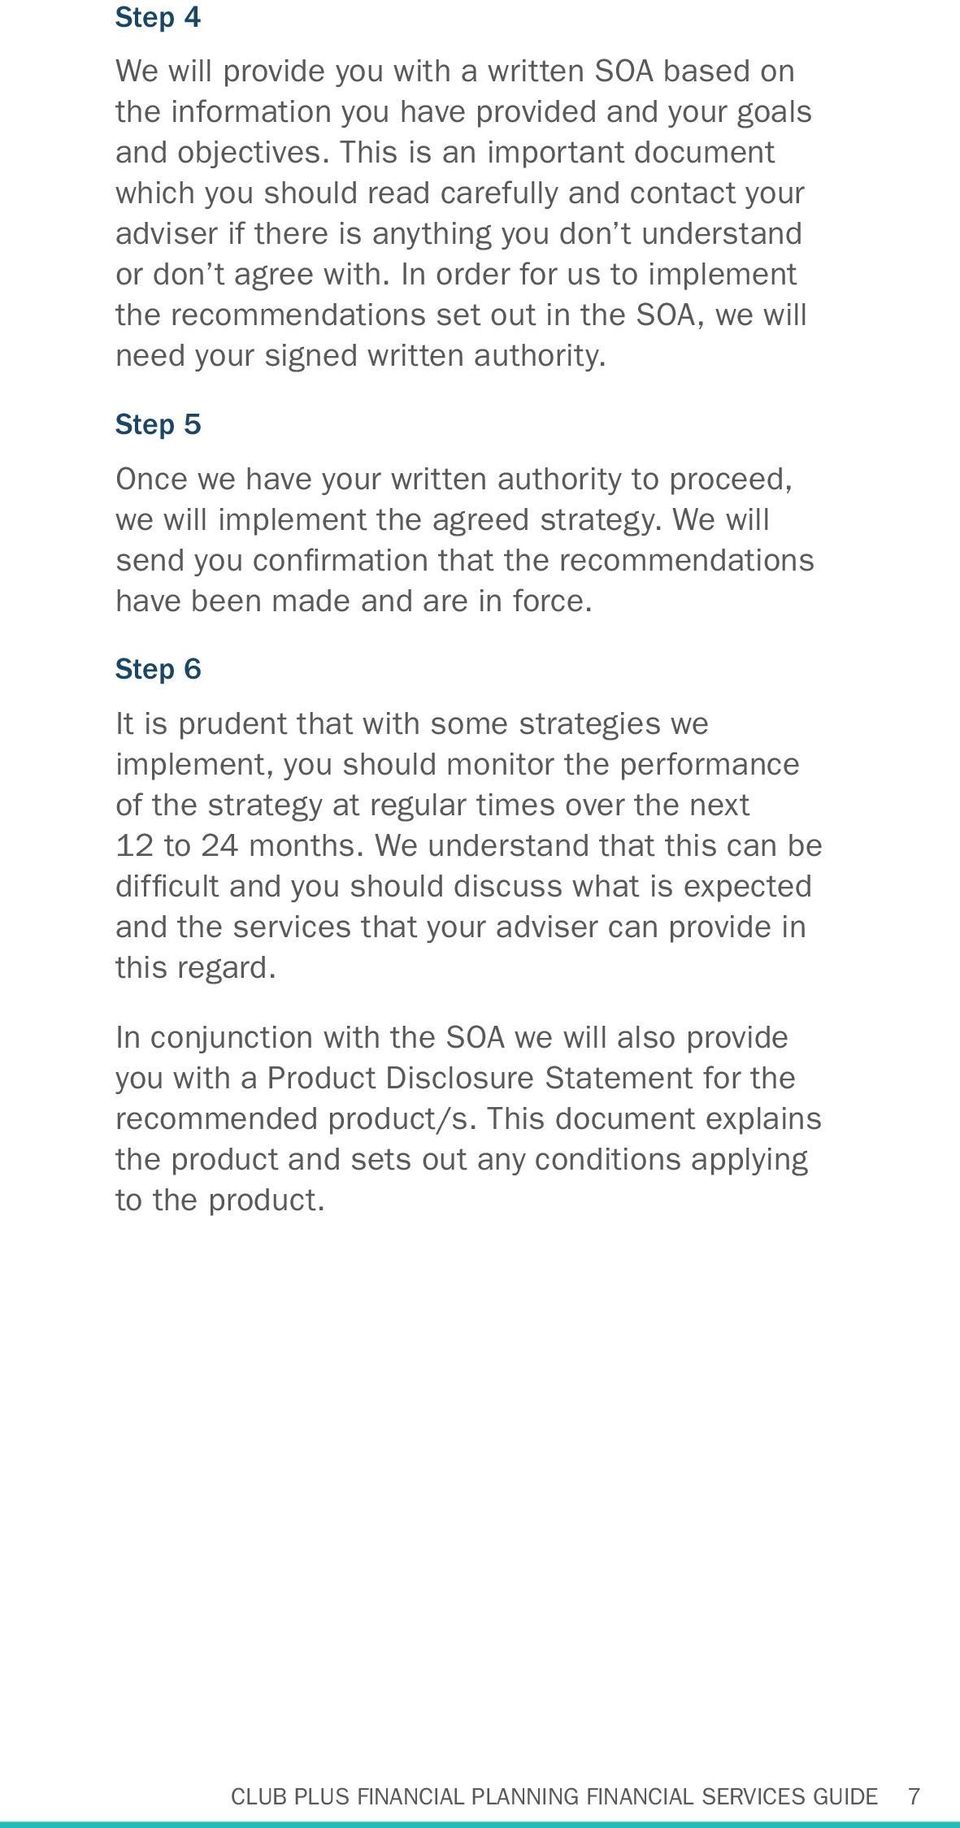 In order for us to implement the recommendations set out in the SOA, we will need your signed written authority.